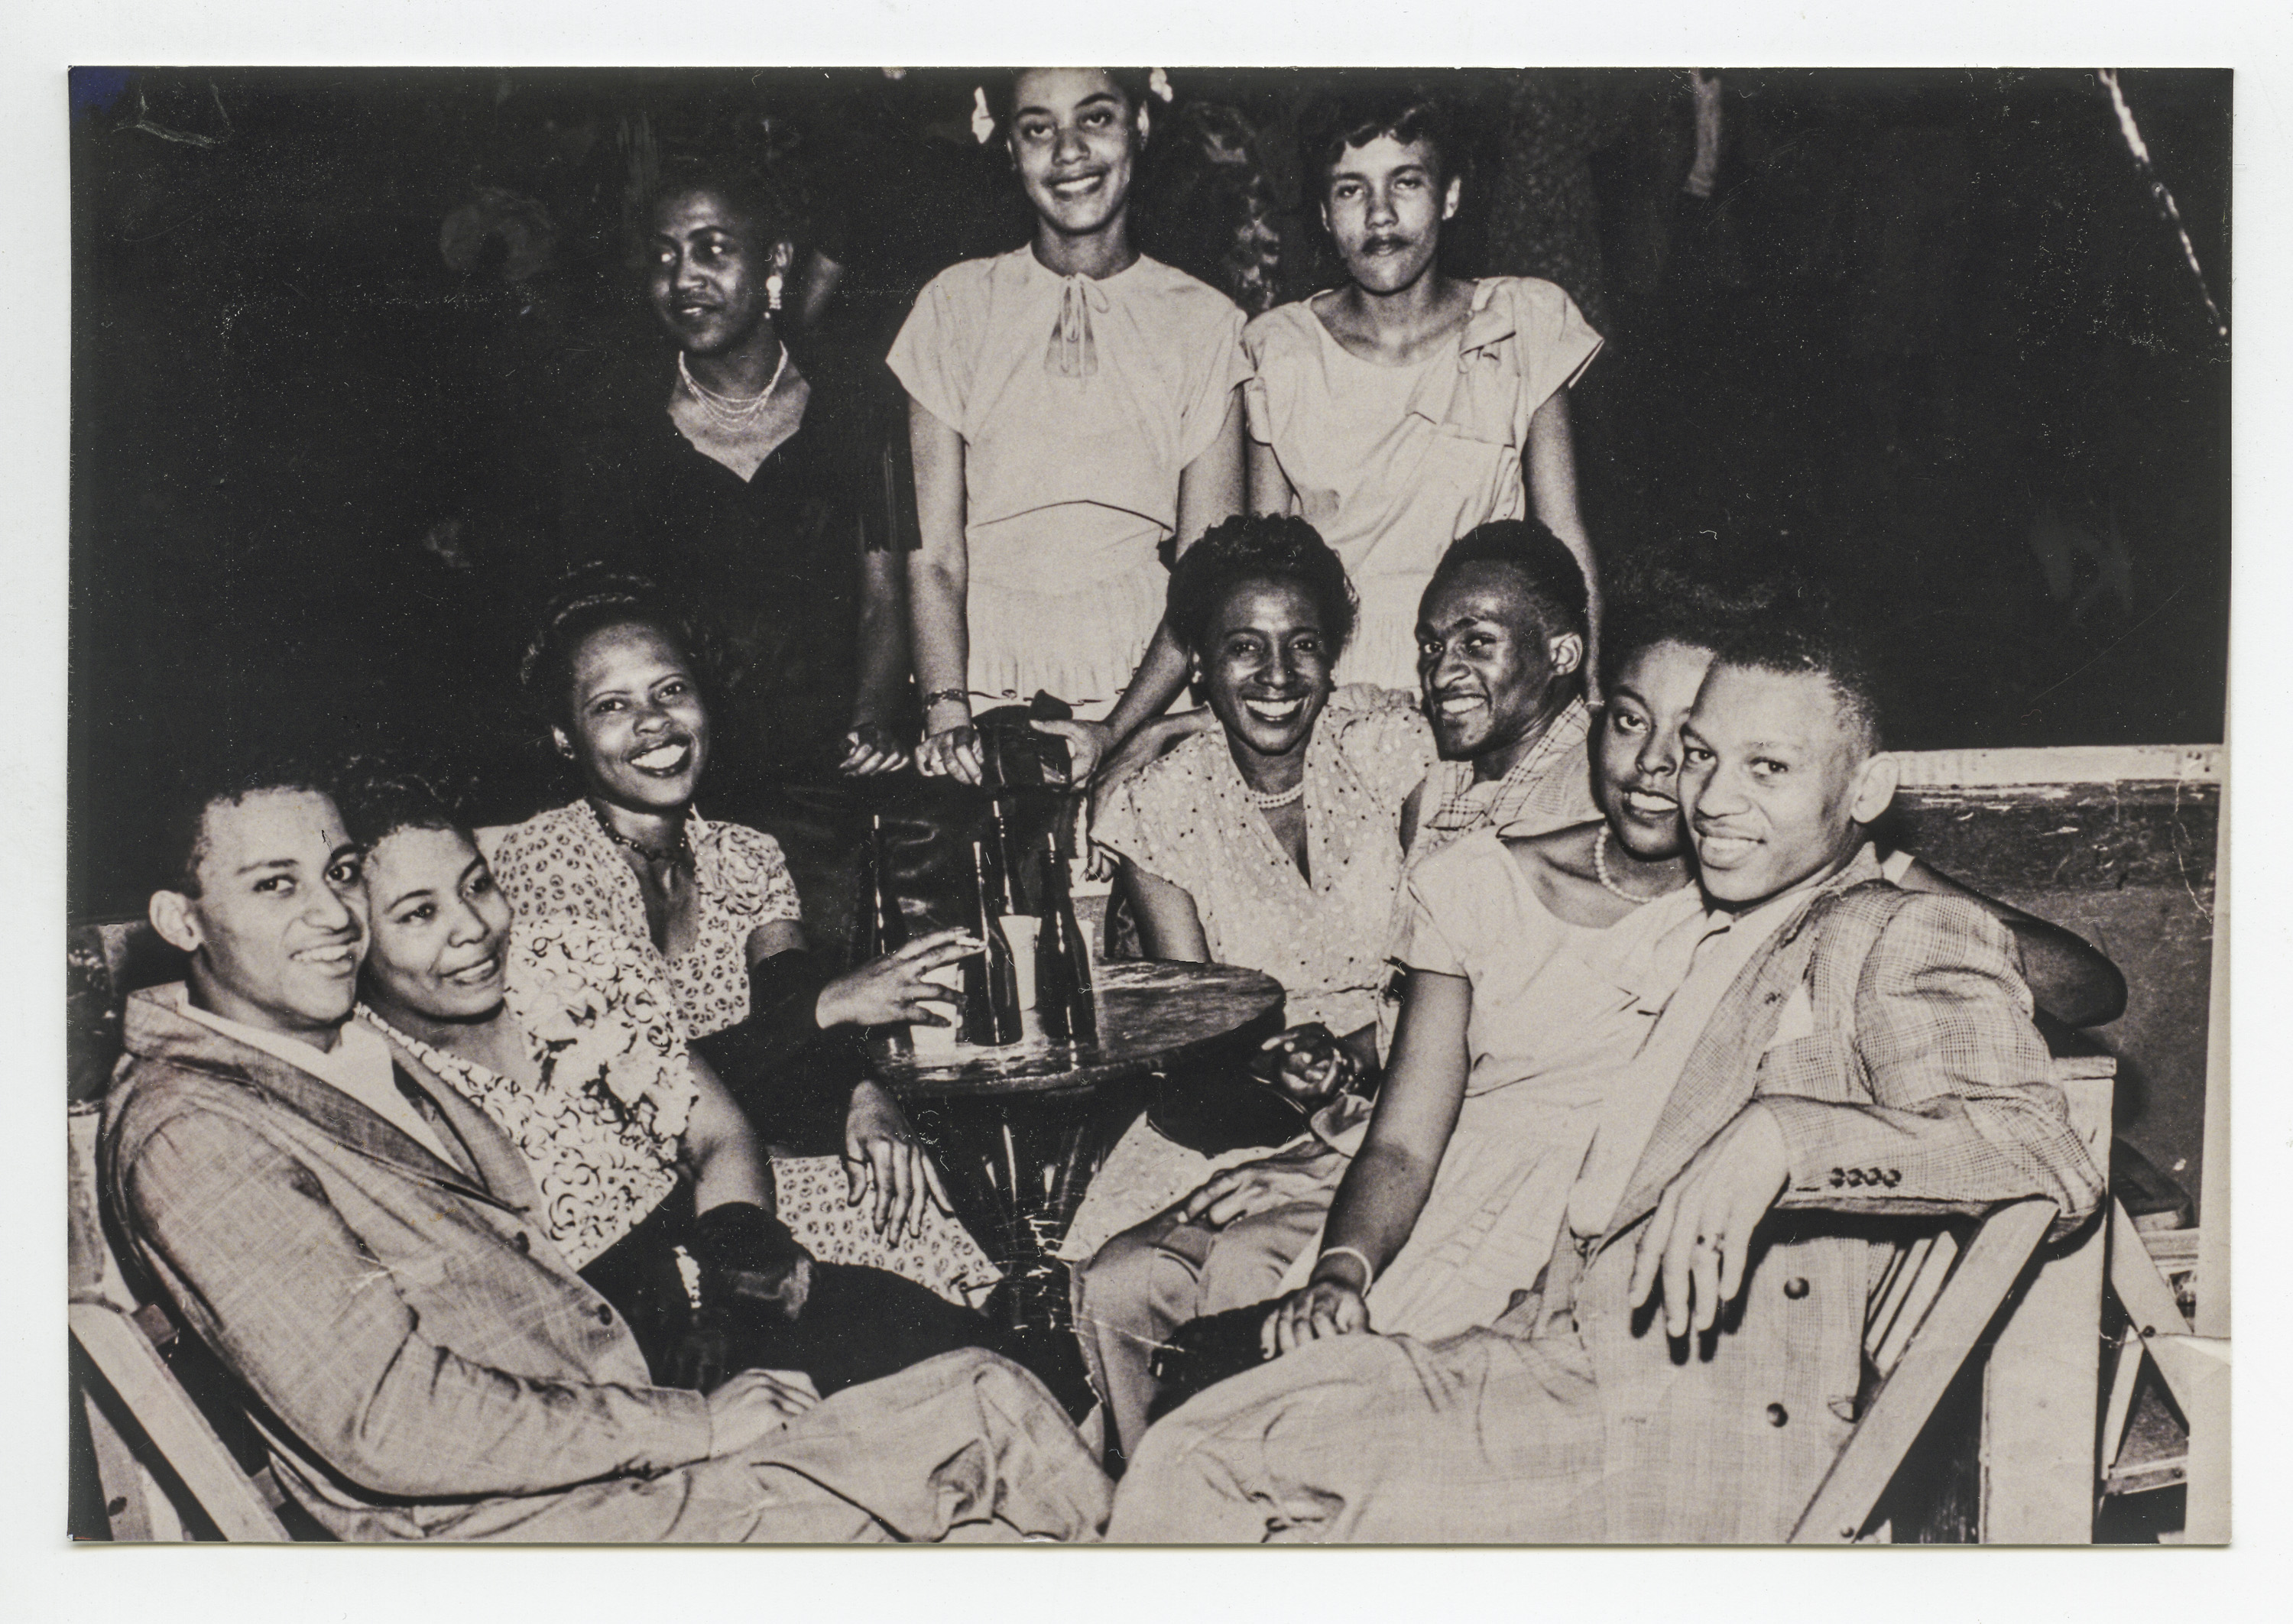 Carmen (2nd to right, seated) with Glenna Rohan (middle, standing) and friends at cocktail party on Lenox Avenue in Harlem, NY in the 1940s.